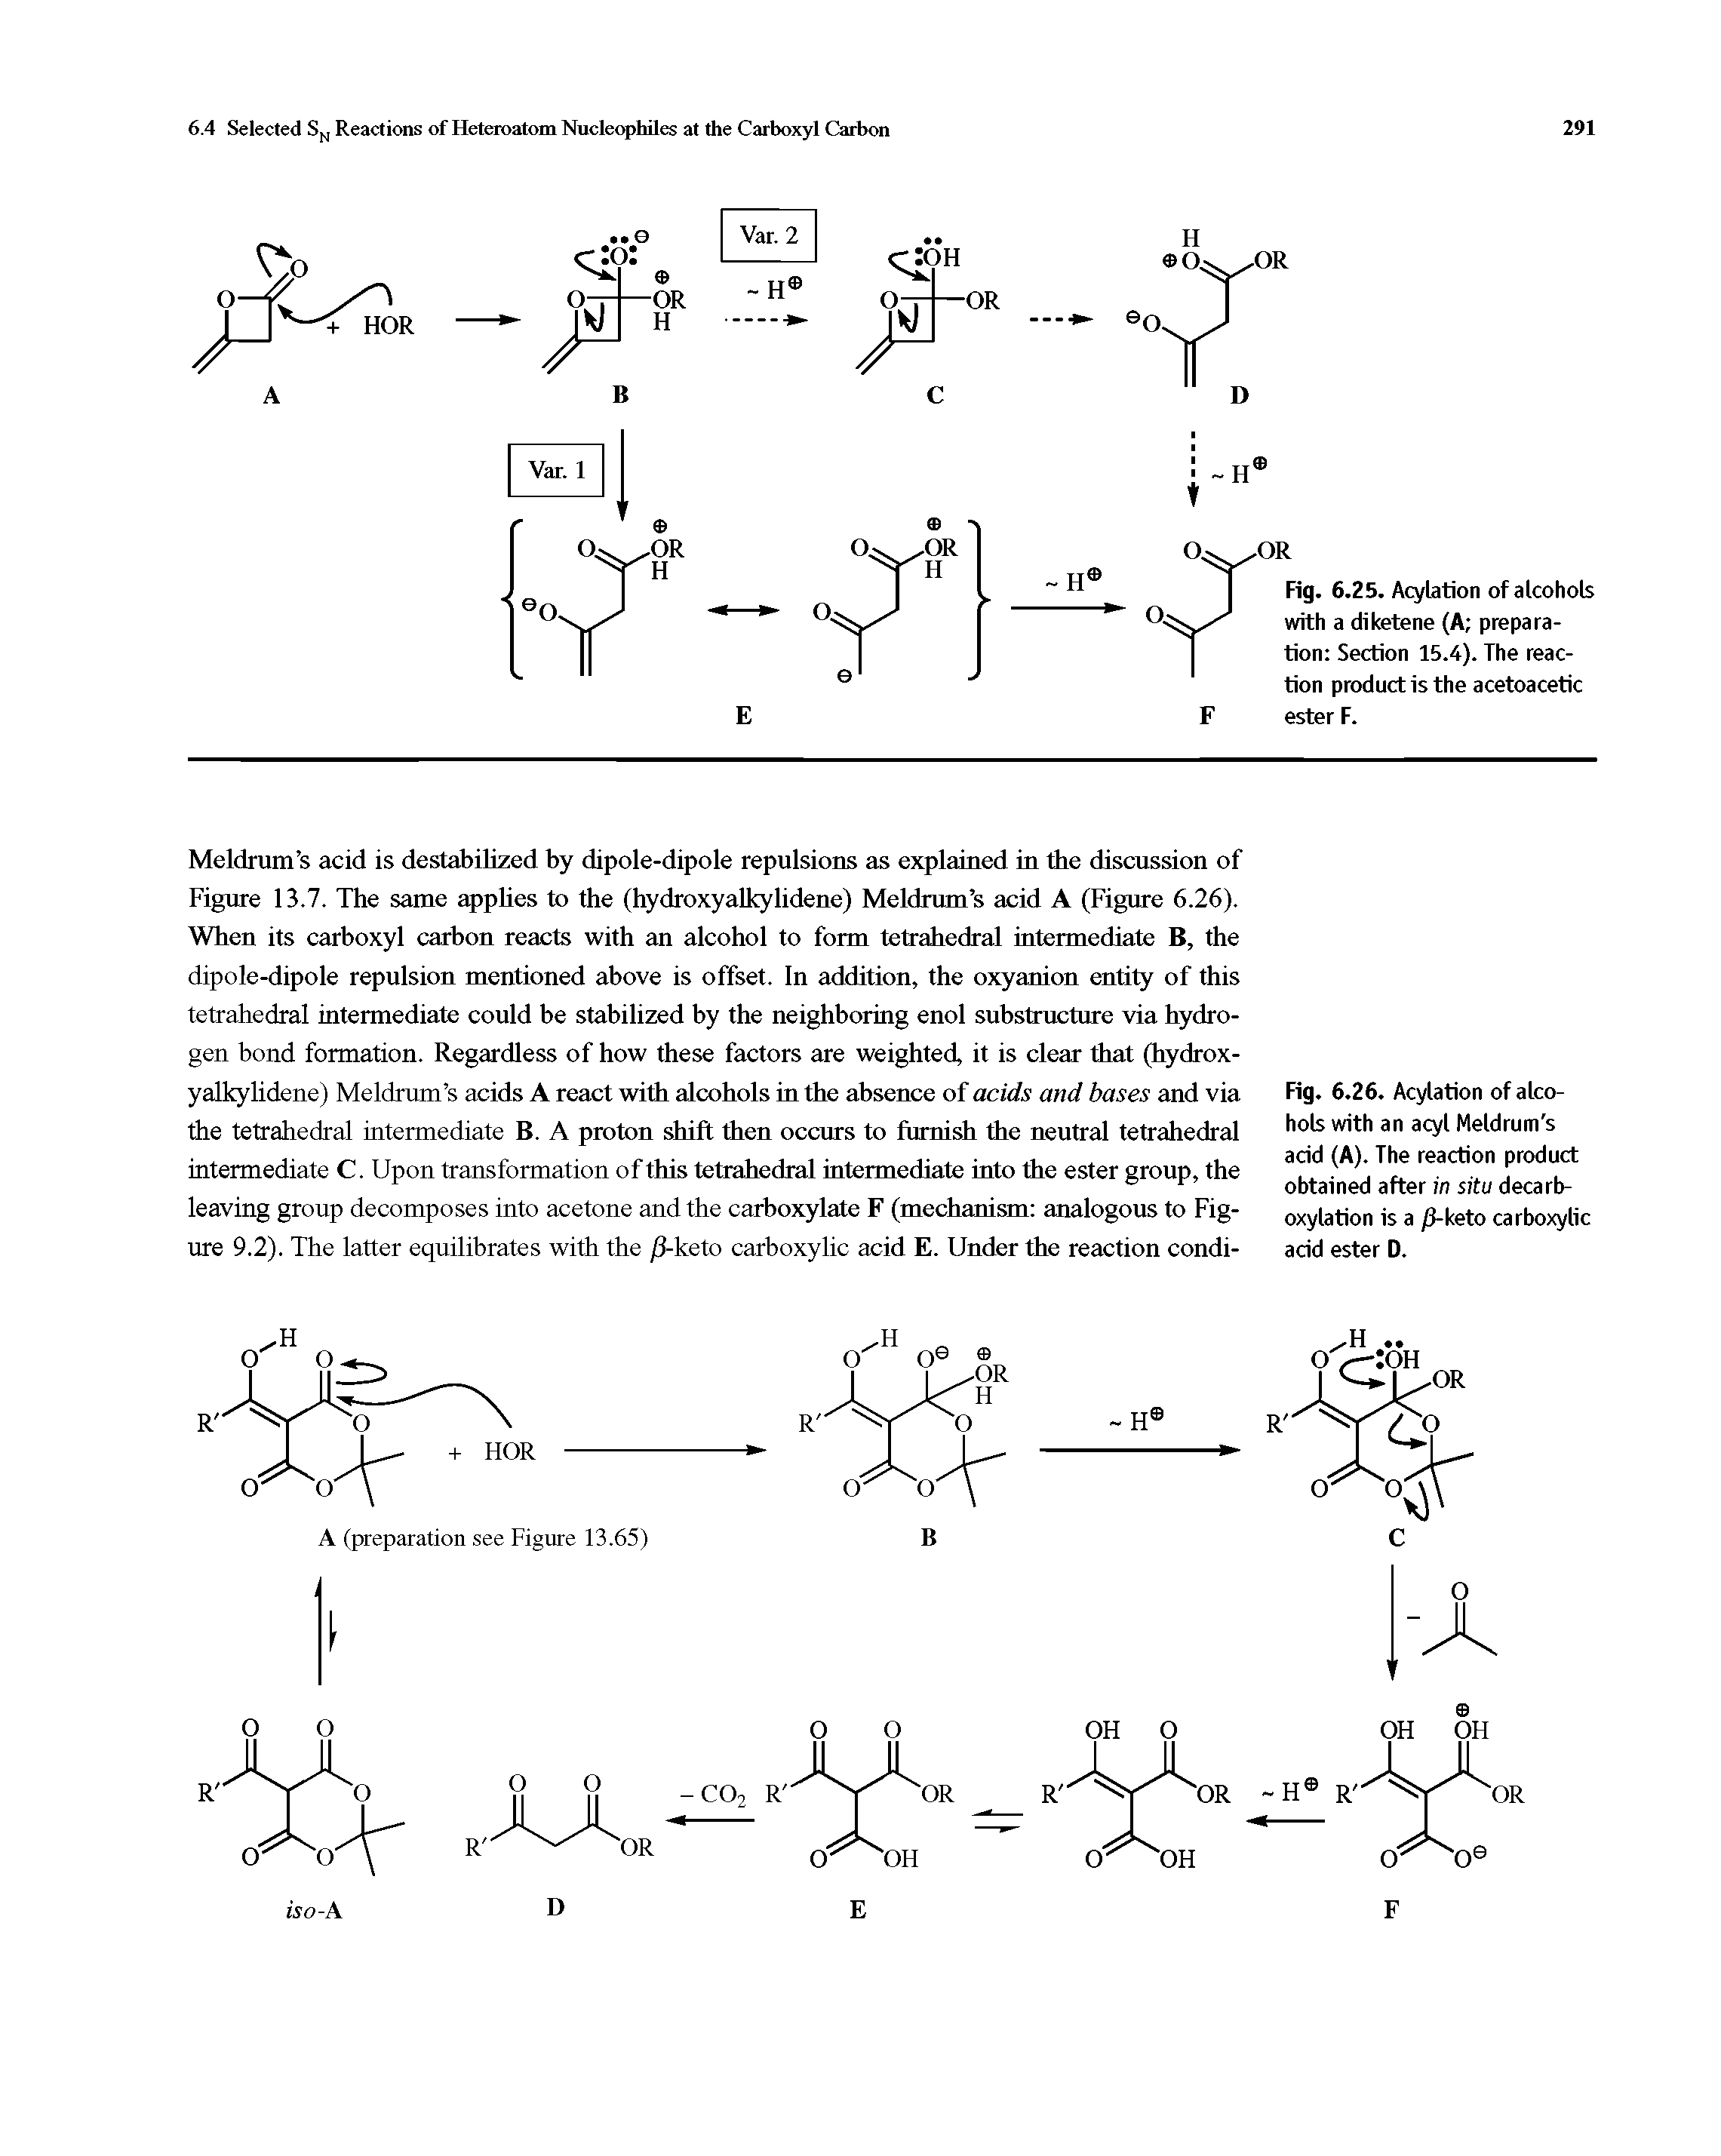 Fig. 6.25. Acylation of alcohols with a diketene (A preparation Section 15.4). The reaction product is the acetoacetic ester F.